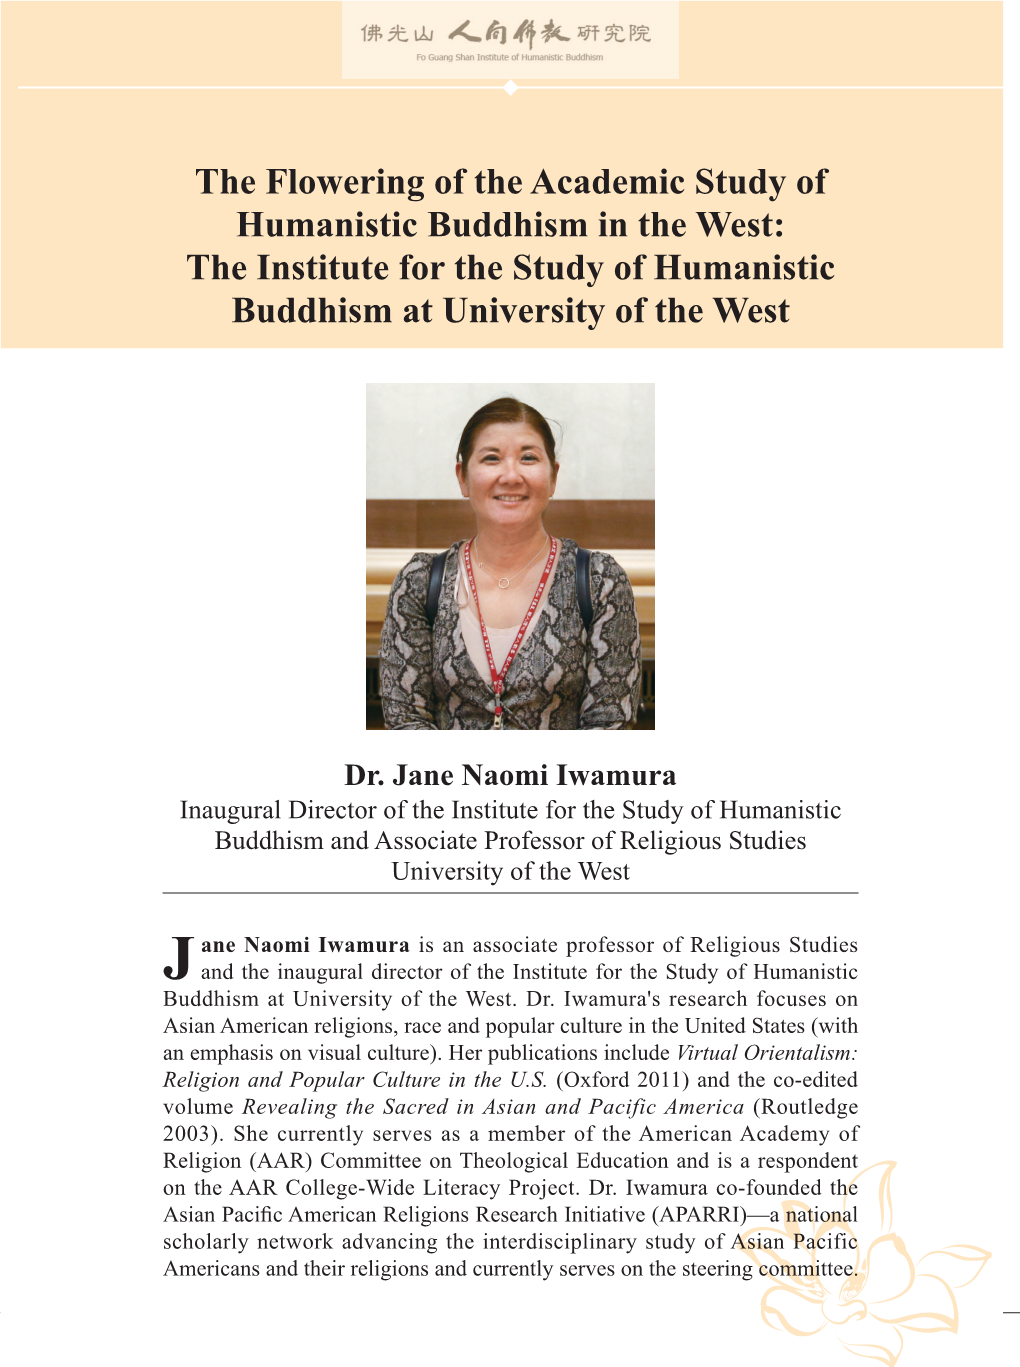 The Flowering of the Academic Study of Humanistic Buddhism in the West: the Institute for the Study of Humanistic Buddhism at University of the West